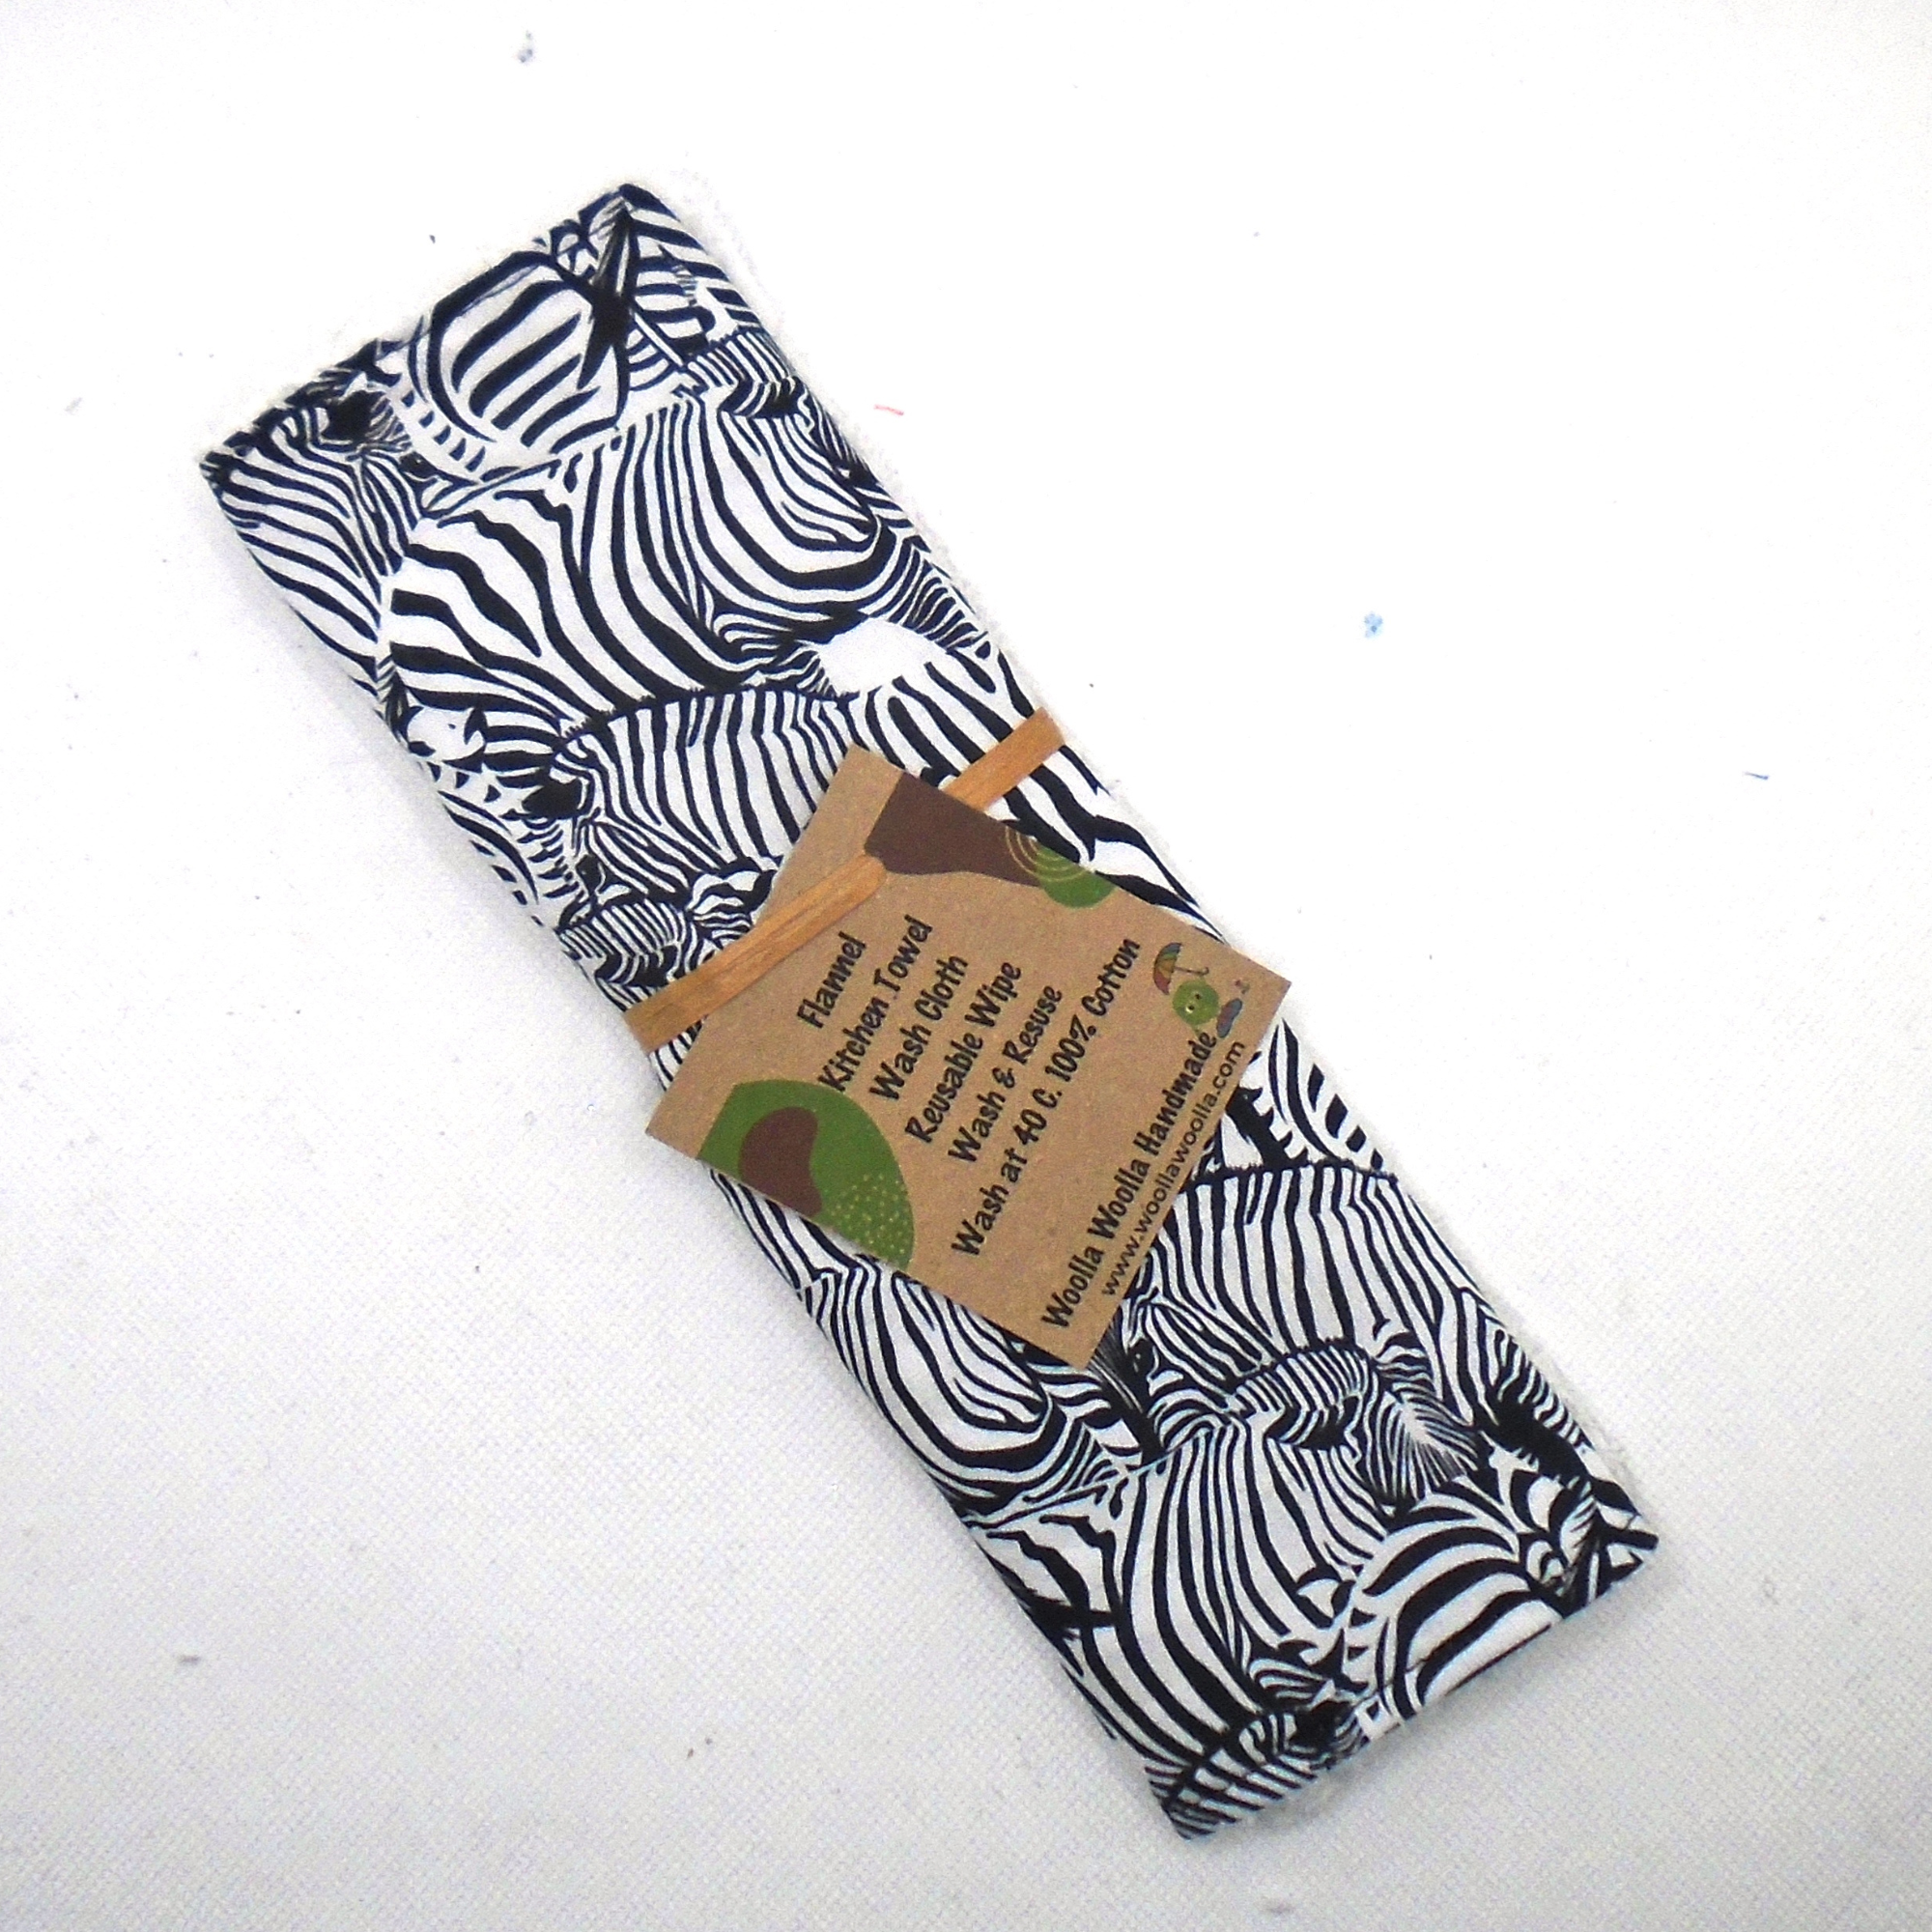 Face Flannel, Towel backed cloth, Bathroom Flannel, Face Wipe, Toddler Wipe, Makeup Remover, Eco Friendly, Plastic Free Zebra Zebra